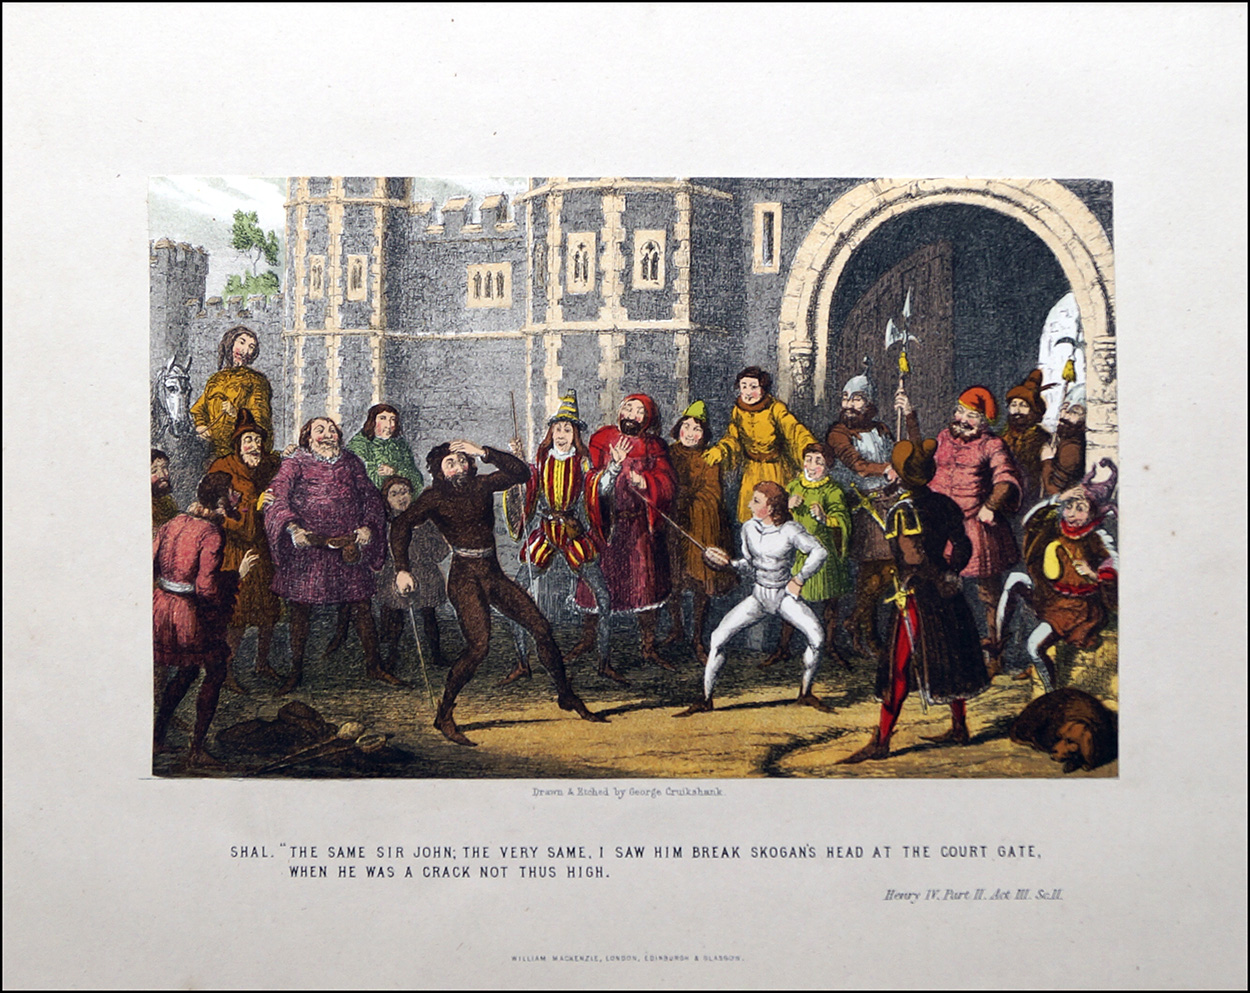 Scenes from Shakespeare - Henry IV Part II (Print) art by George Cruikshank at The Illustration Art Gallery